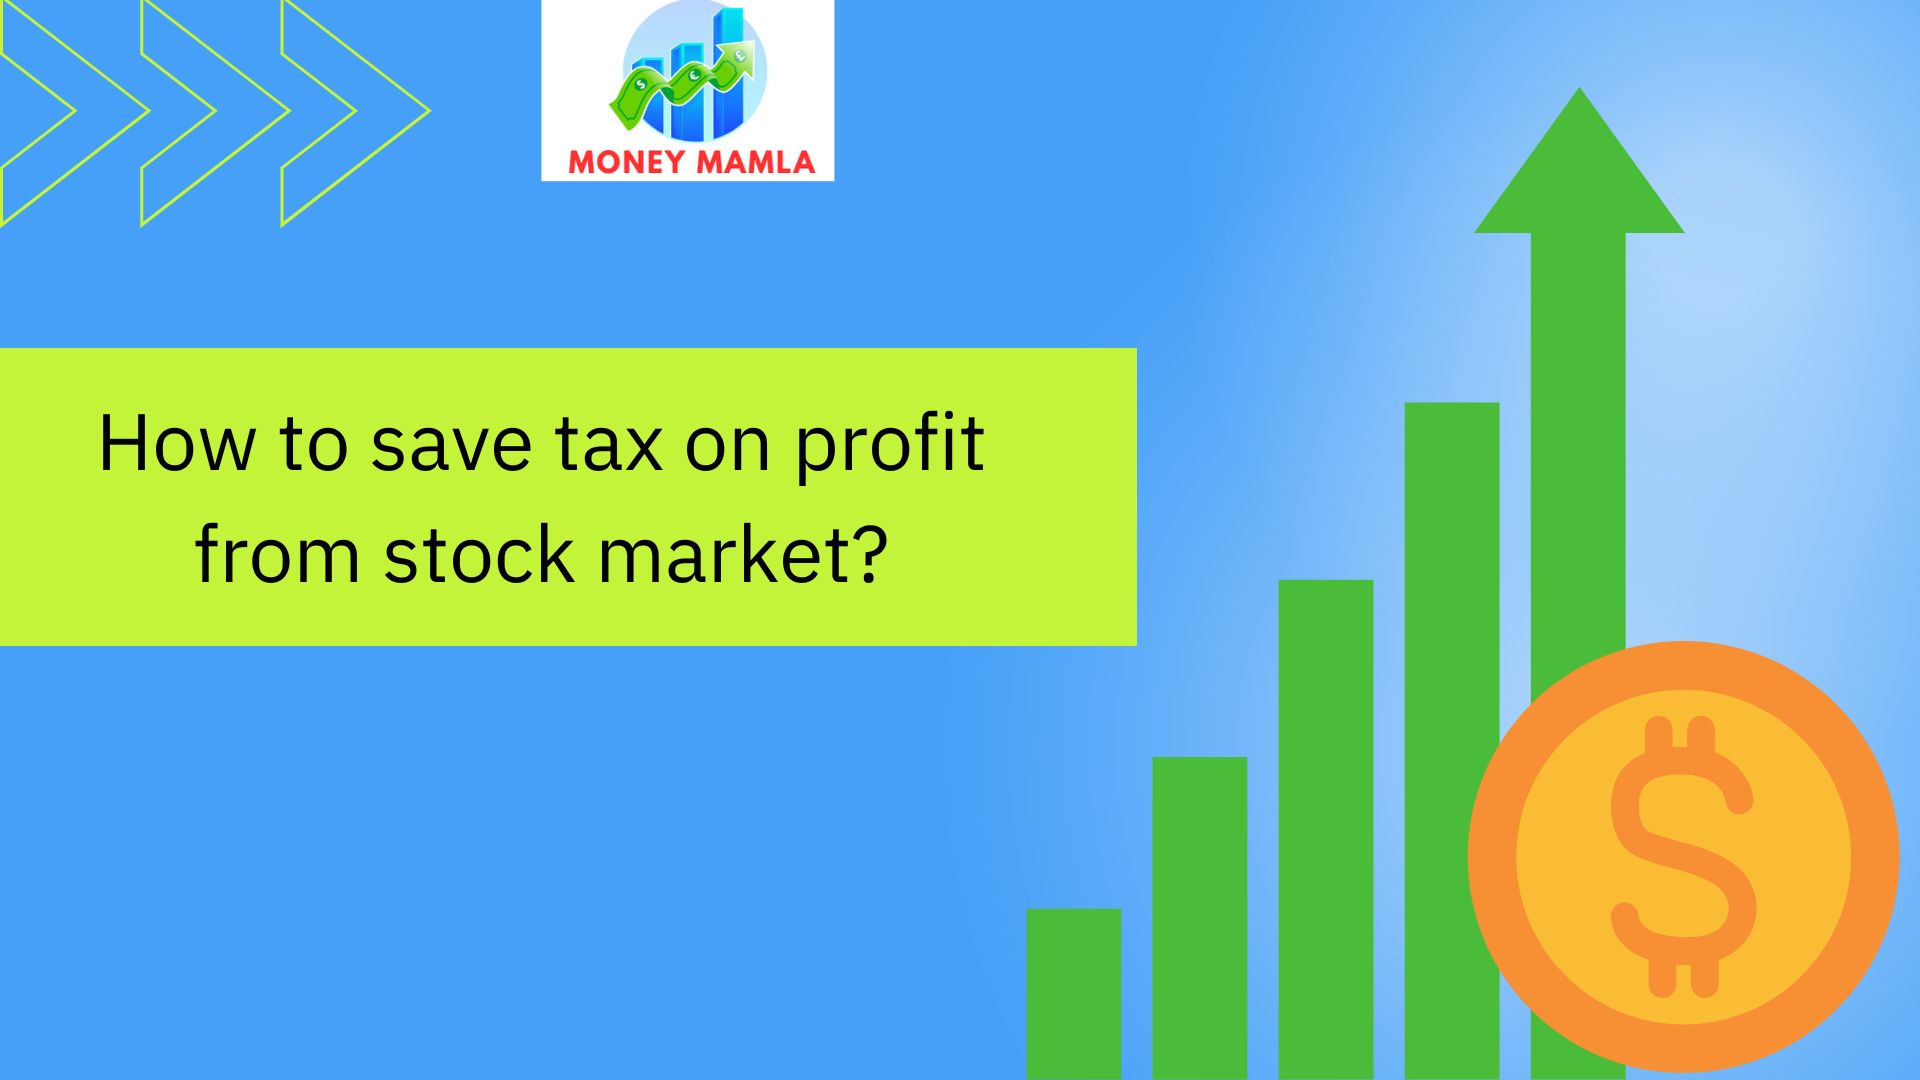 How to save tax on profit from stock market